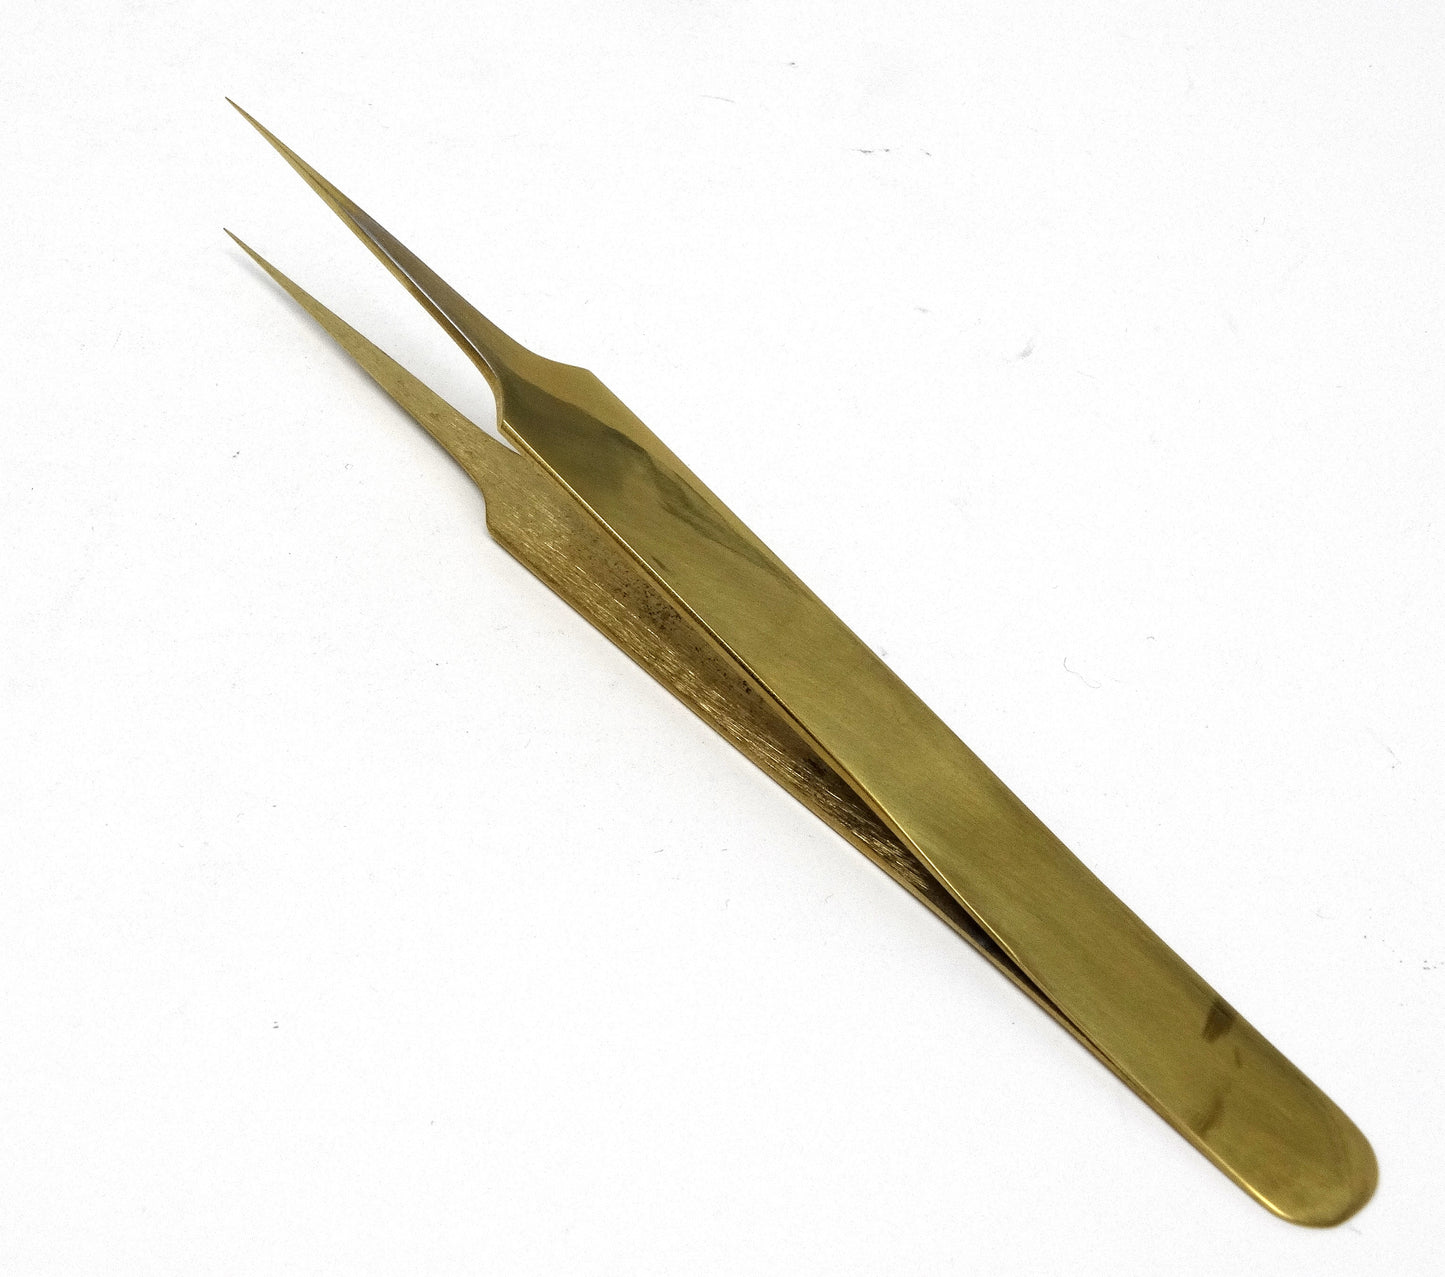 Stainless Steel Watch & Jewelery Repair Tweezers #4 Forceps, Fine Point, Gold Plated, Premium Quality